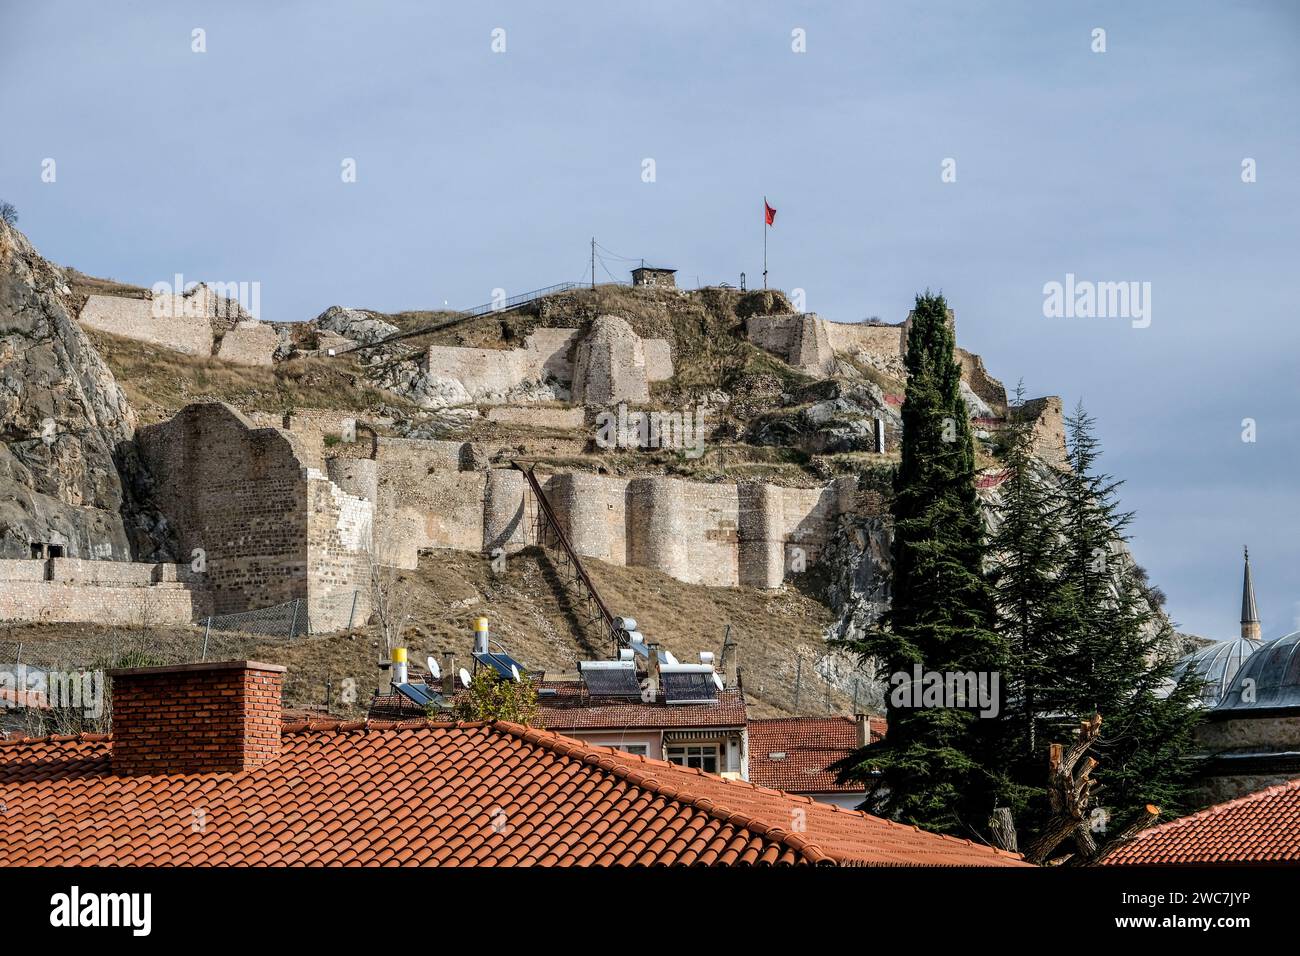 Tokat Castle, is an ancient citadel with 28 towers built on top of a rocky peak in the center of Tokat, Turkey. Stock Photo